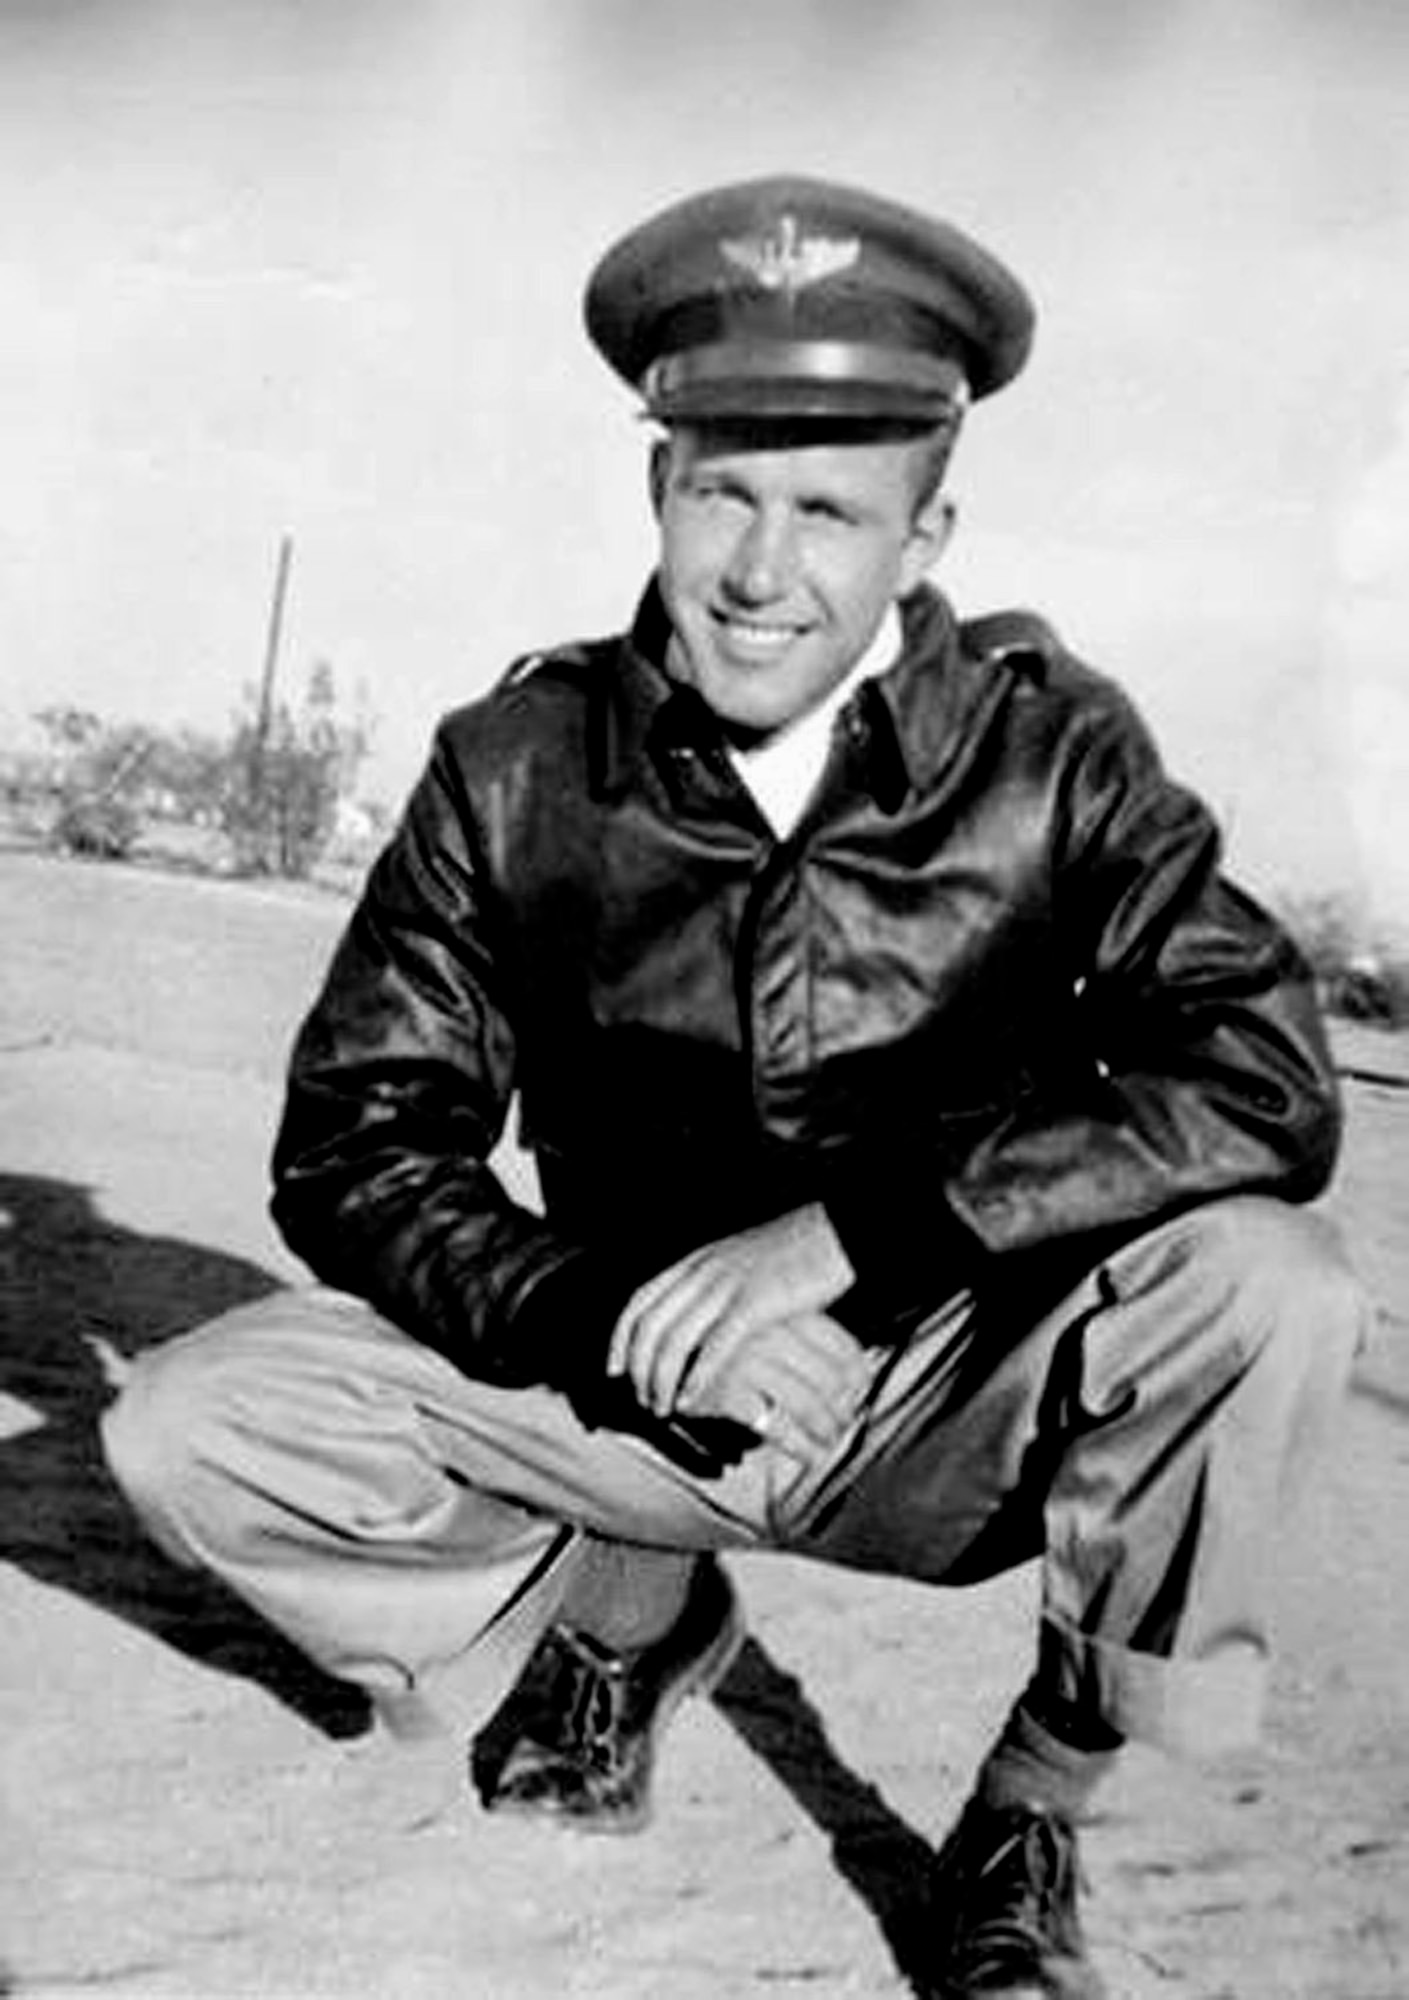 2nd Lt. Harold E. Hoskin is shown in 1943. Lieutenant Hoskin was one of five men who were flying in a B-24 Liberator that crashed while on a test flight Dec. 21, 1943, out of Ladd Field in Fairbanks, Alaska. Lieutenant Hoskin's remains were discovered in August 2006 and identified in April 2007. He was buried in a ceremony Sept. 7 at Arlington National Cemetery in Virginia. (Courtesy photo)